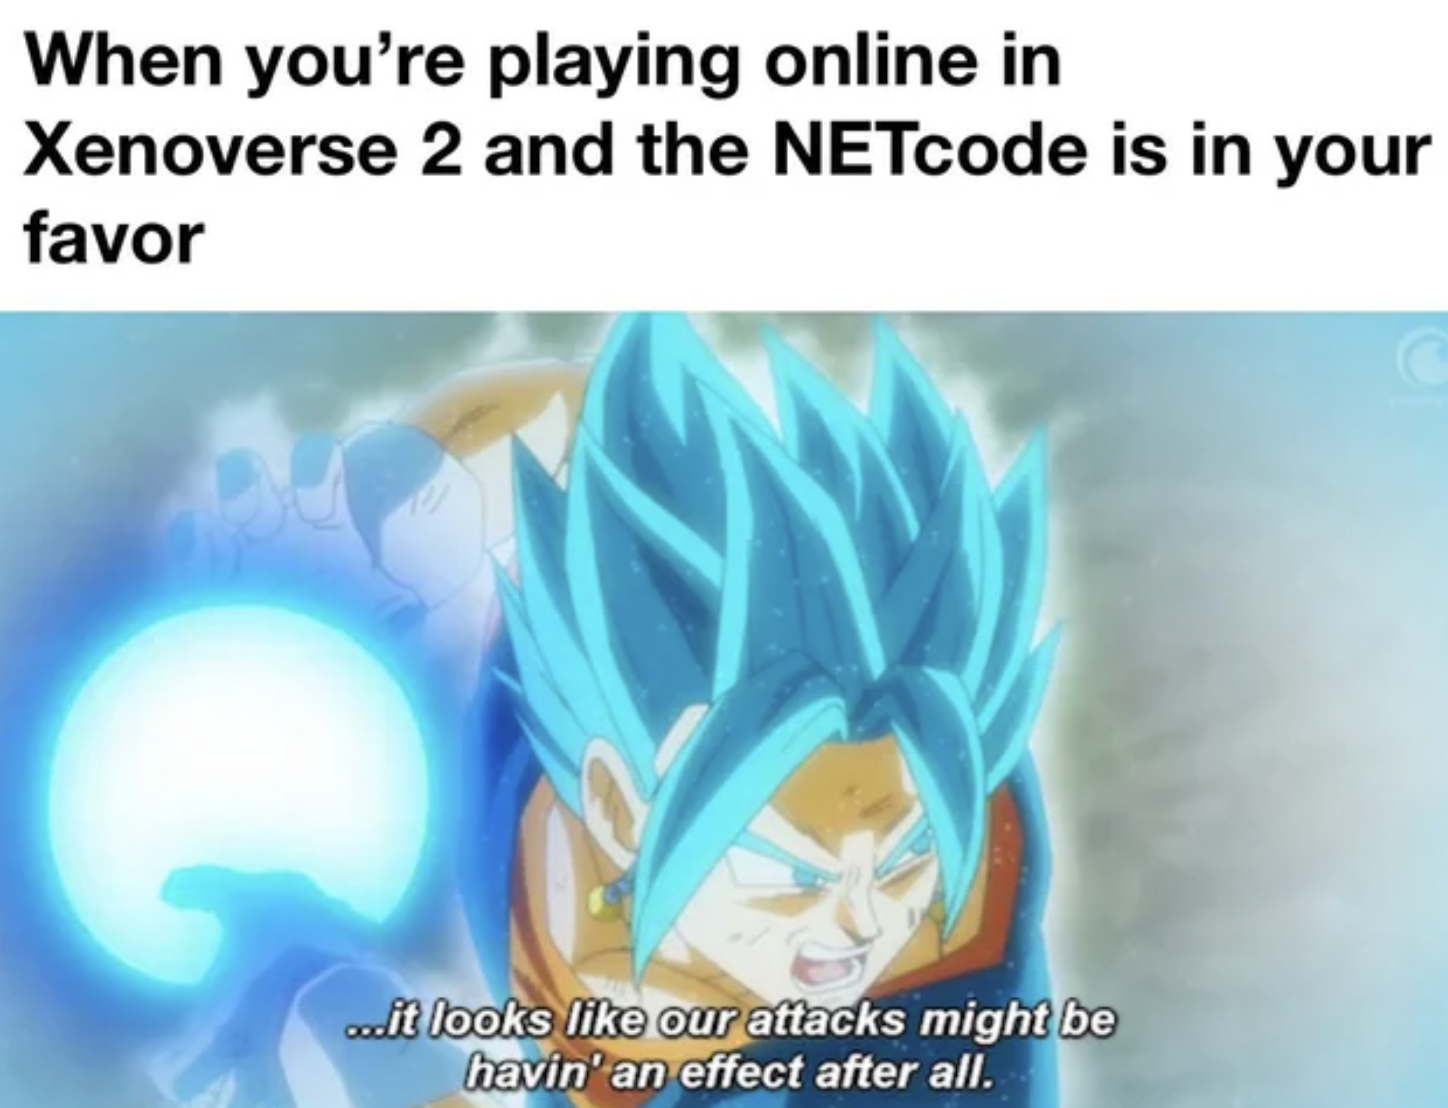 When you're playing online in Xenoverse 2 and the NETcode is in your favor ...it looks our attacks might be havin' an effect after all.